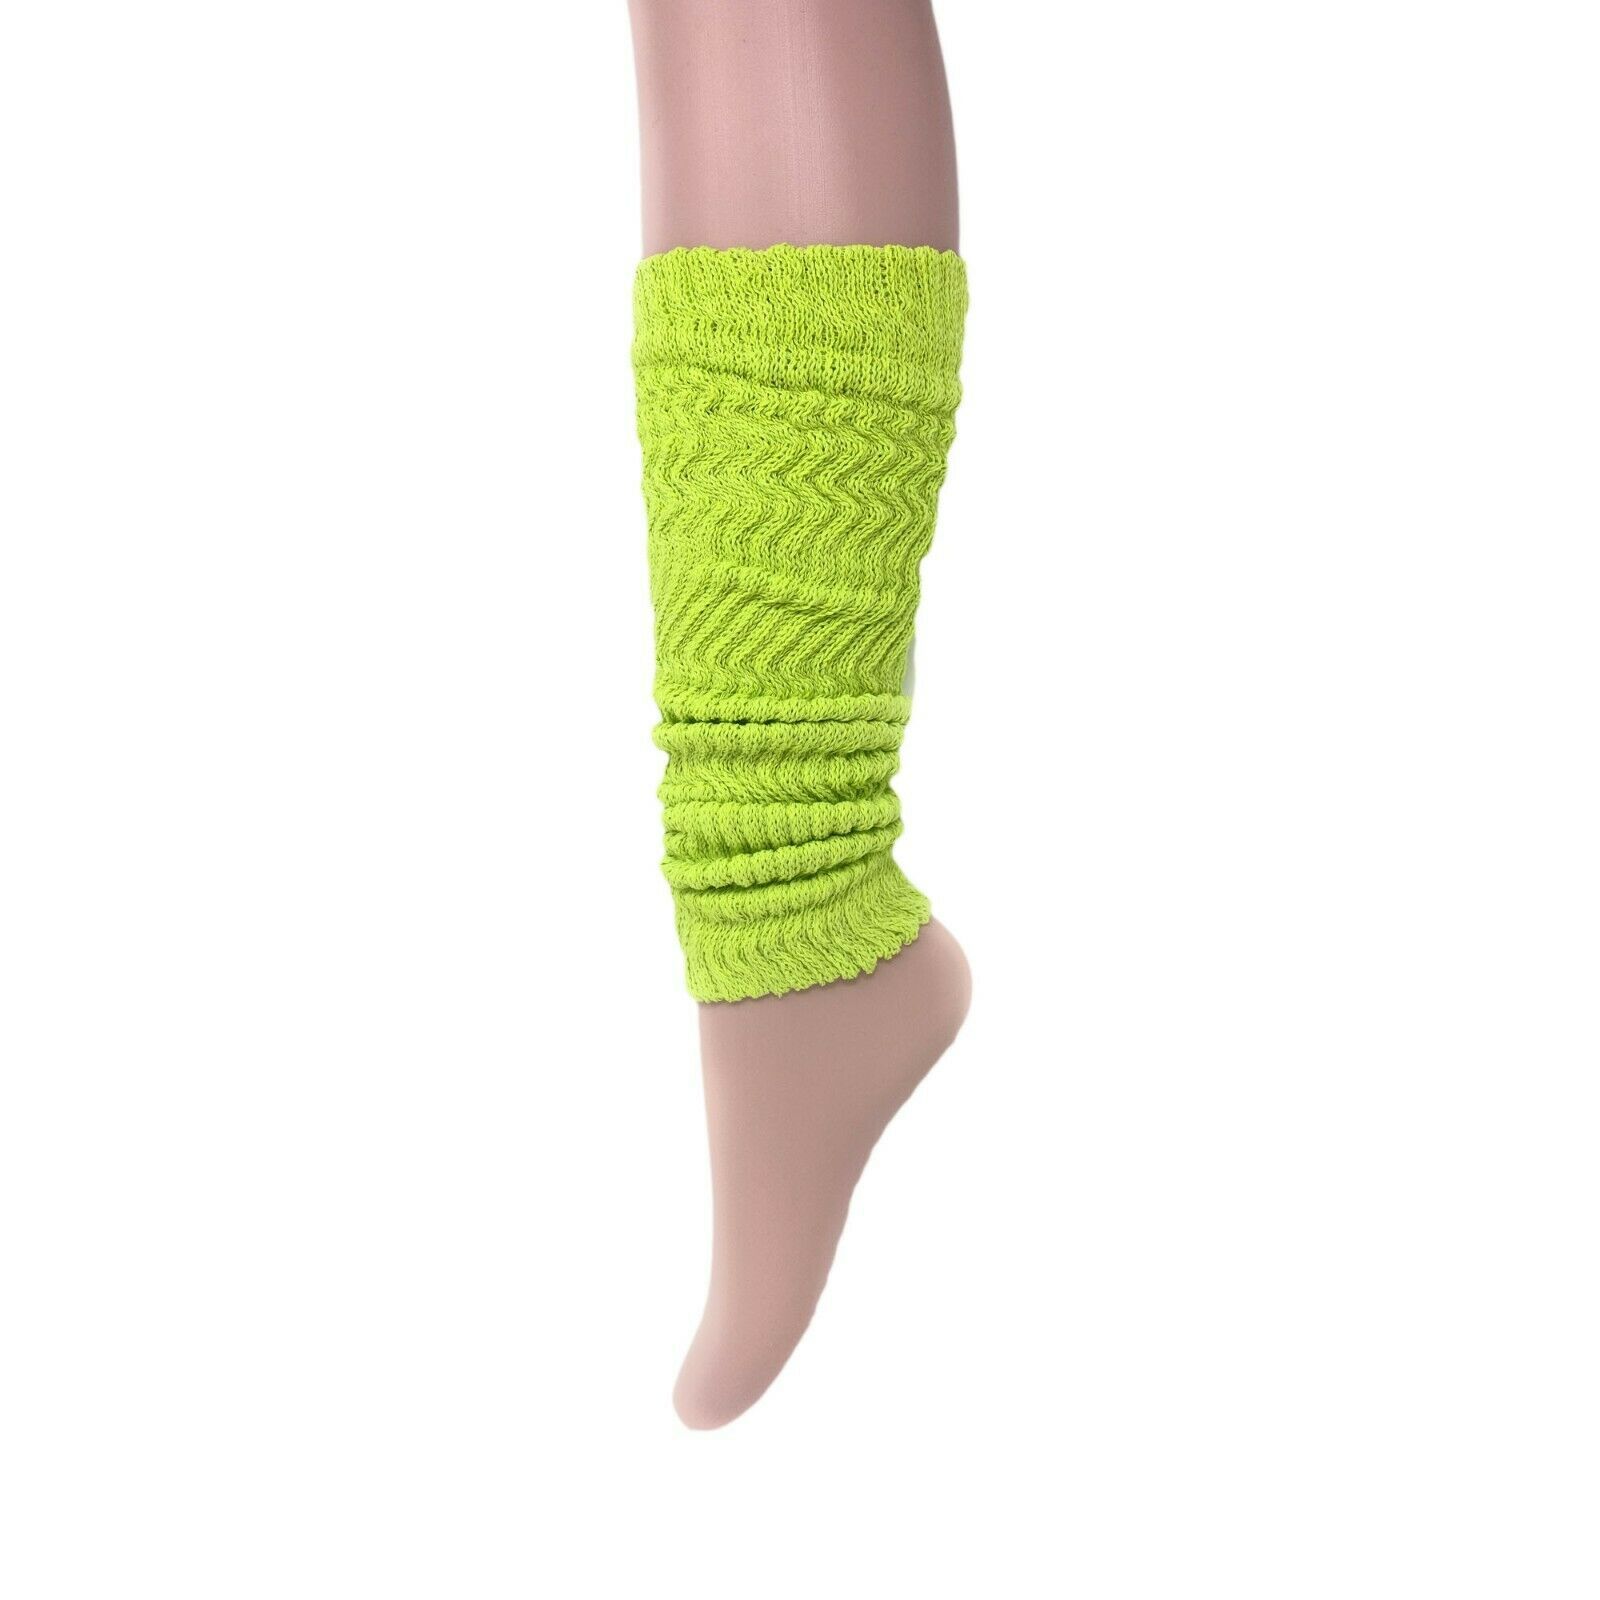 Leg Warmers for Women 80s Style Knitted Knee High